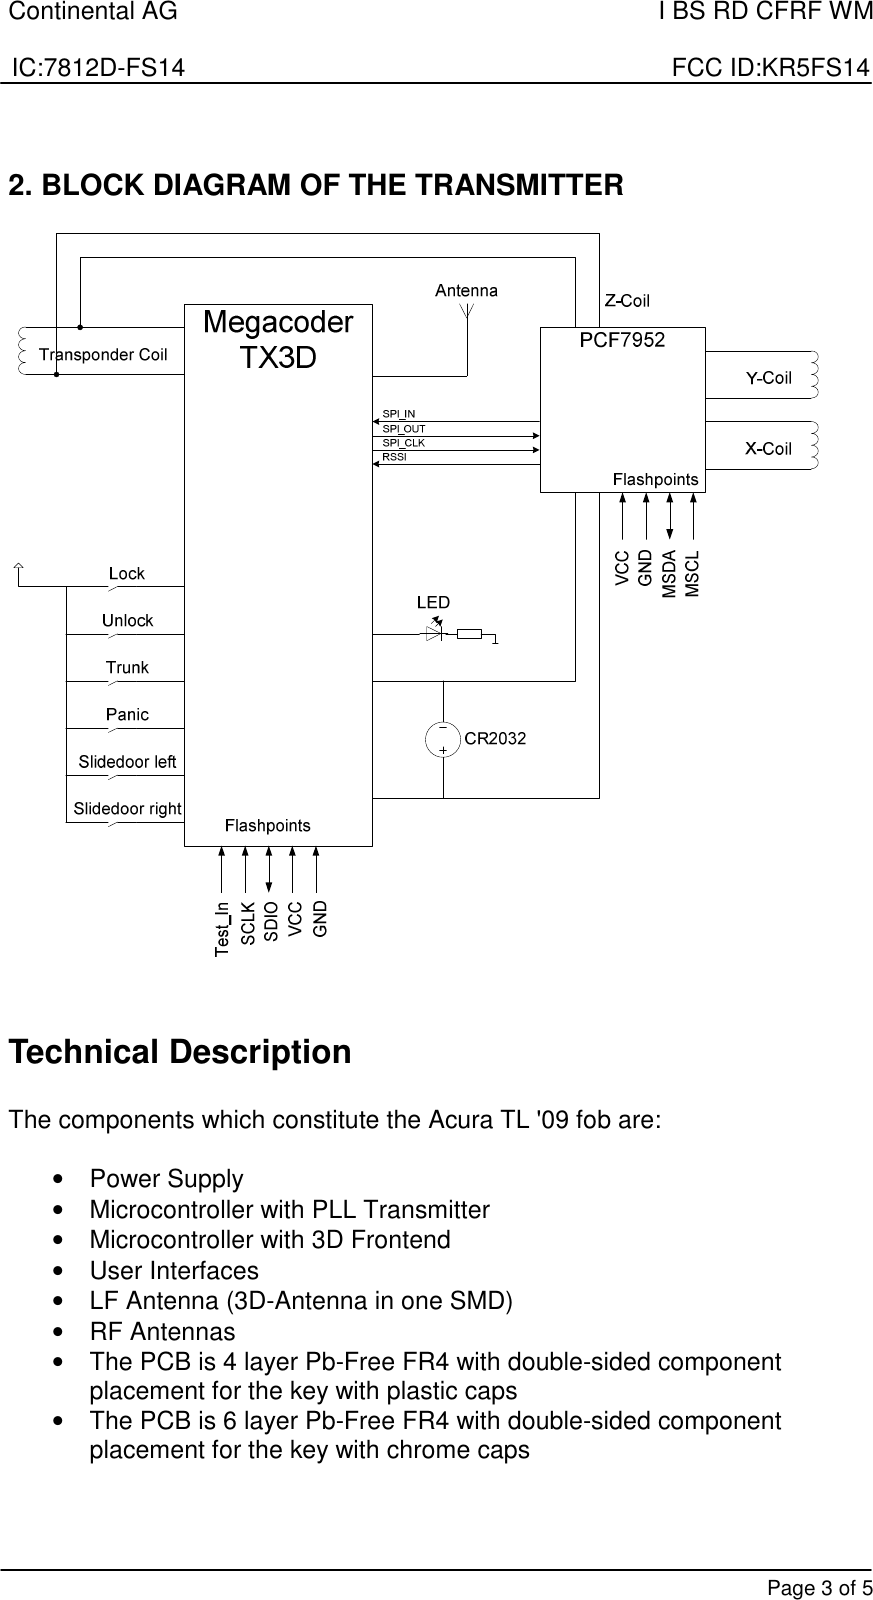 Continental AG    I BS RD CFRF WM  IC:7812D-FS14                                                                      FCC ID:KR5FS14       Page 3 of 5  2. BLOCK DIAGRAM OF THE TRANSMITTER    Technical Description  The components which constitute the Acura TL &apos;09 fob are:  •  Power Supply •  Microcontroller with PLL Transmitter •  Microcontroller with 3D Frontend •  User Interfaces •  LF Antenna (3D-Antenna in one SMD)   •  RF Antennas •  The PCB is 4 layer Pb-Free FR4 with double-sided component placement for the key with plastic caps •  The PCB is 6 layer Pb-Free FR4 with double-sided component placement for the key with chrome caps   